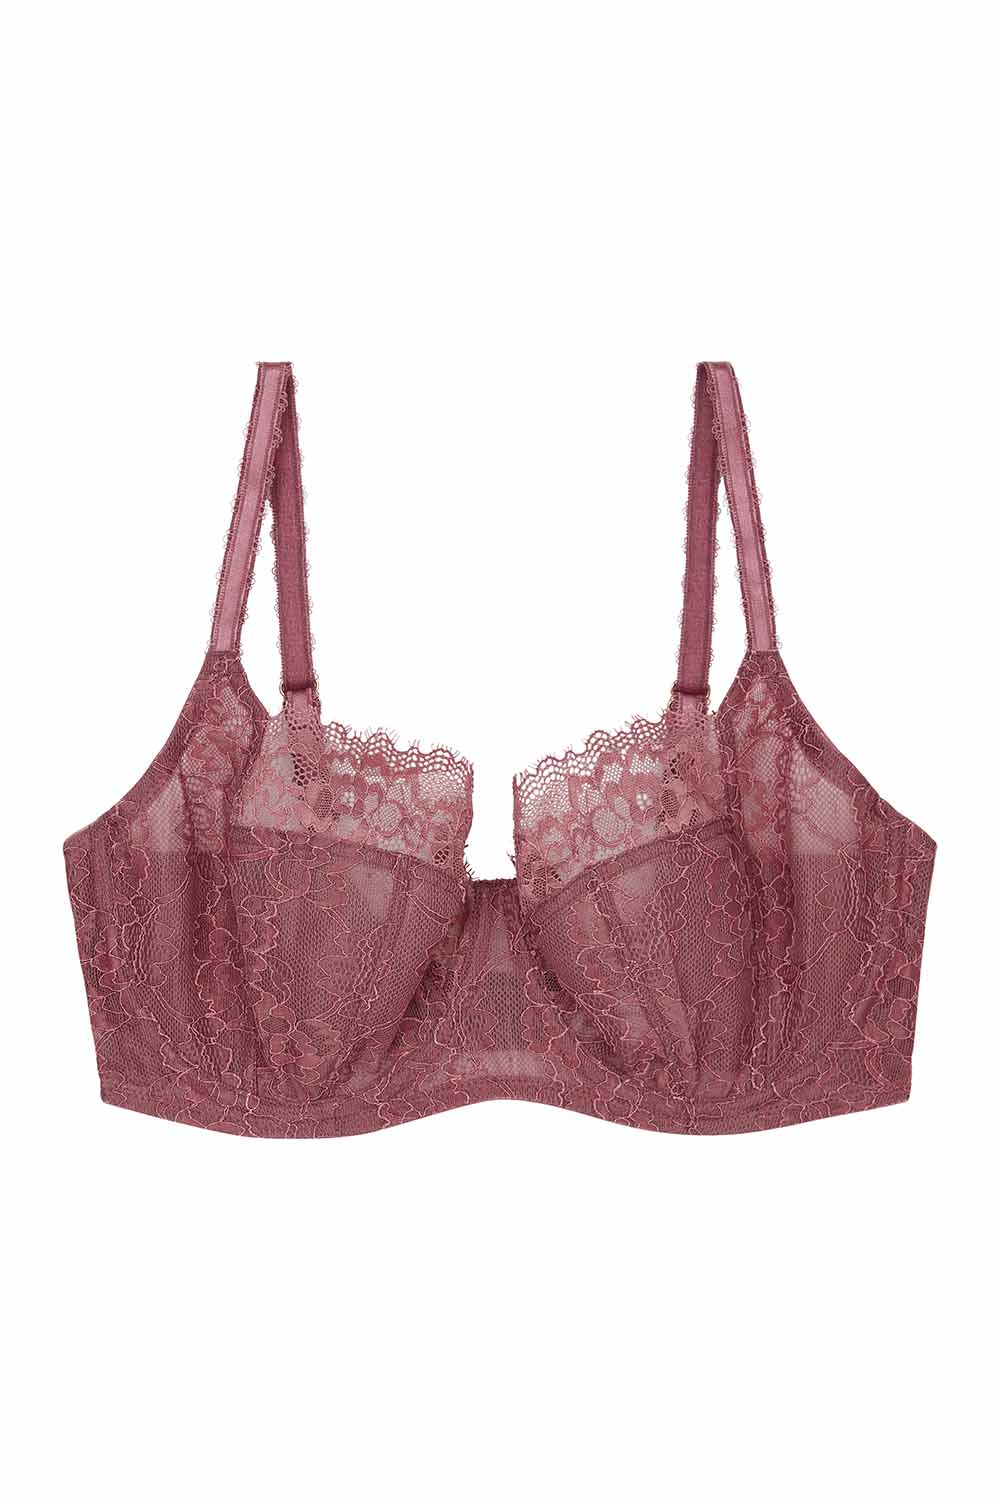 Victoria's Secret - The unlined Wicked bra you can't get enough of